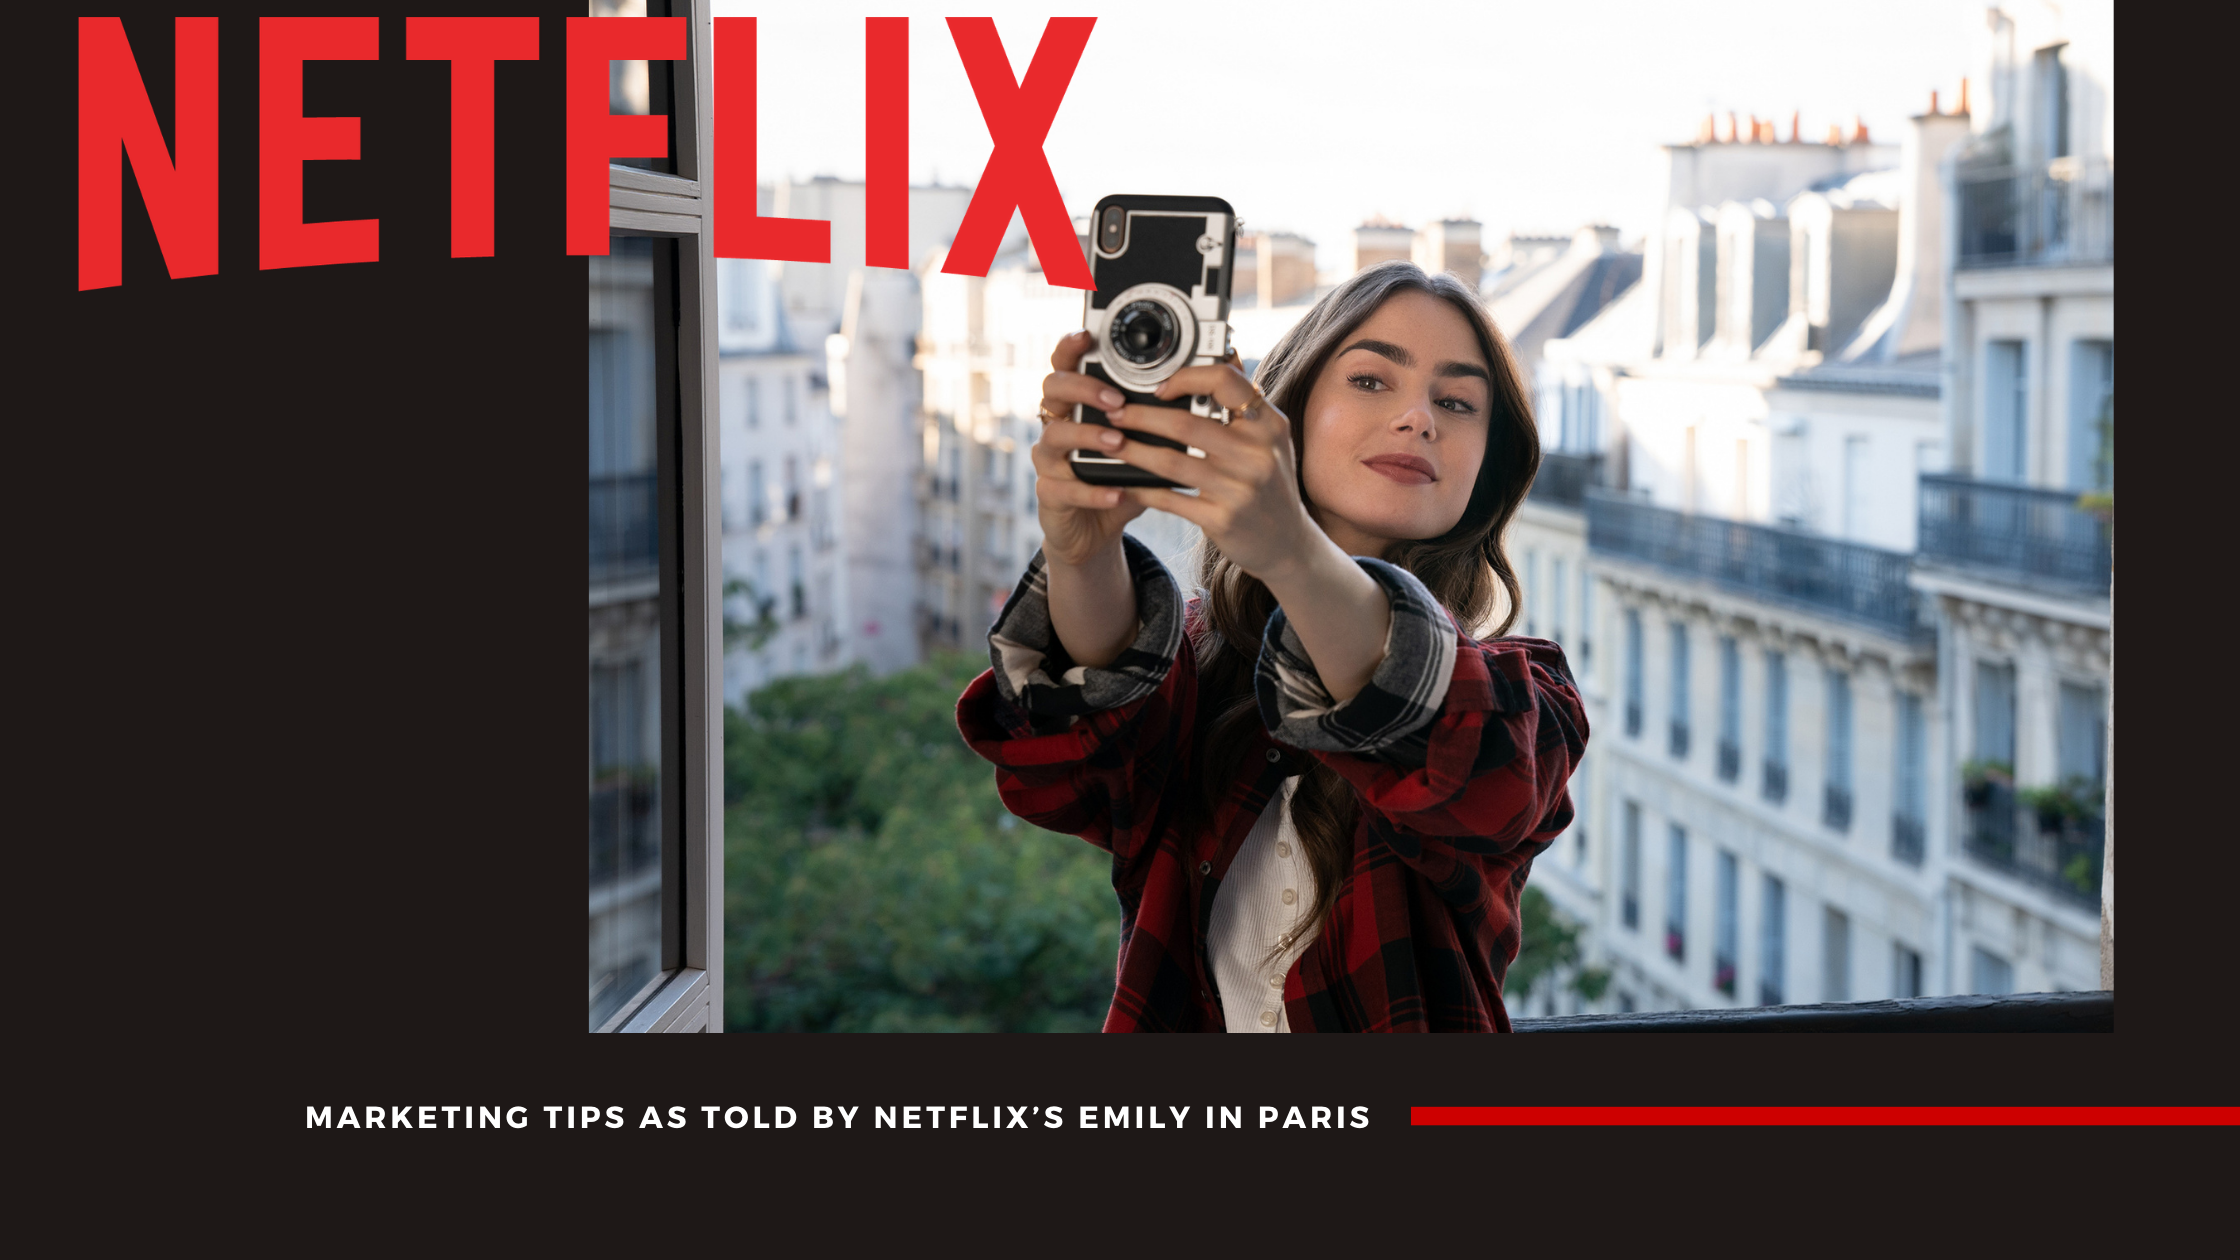 Emily in Paris Features Valuable Relationships - Product Placement